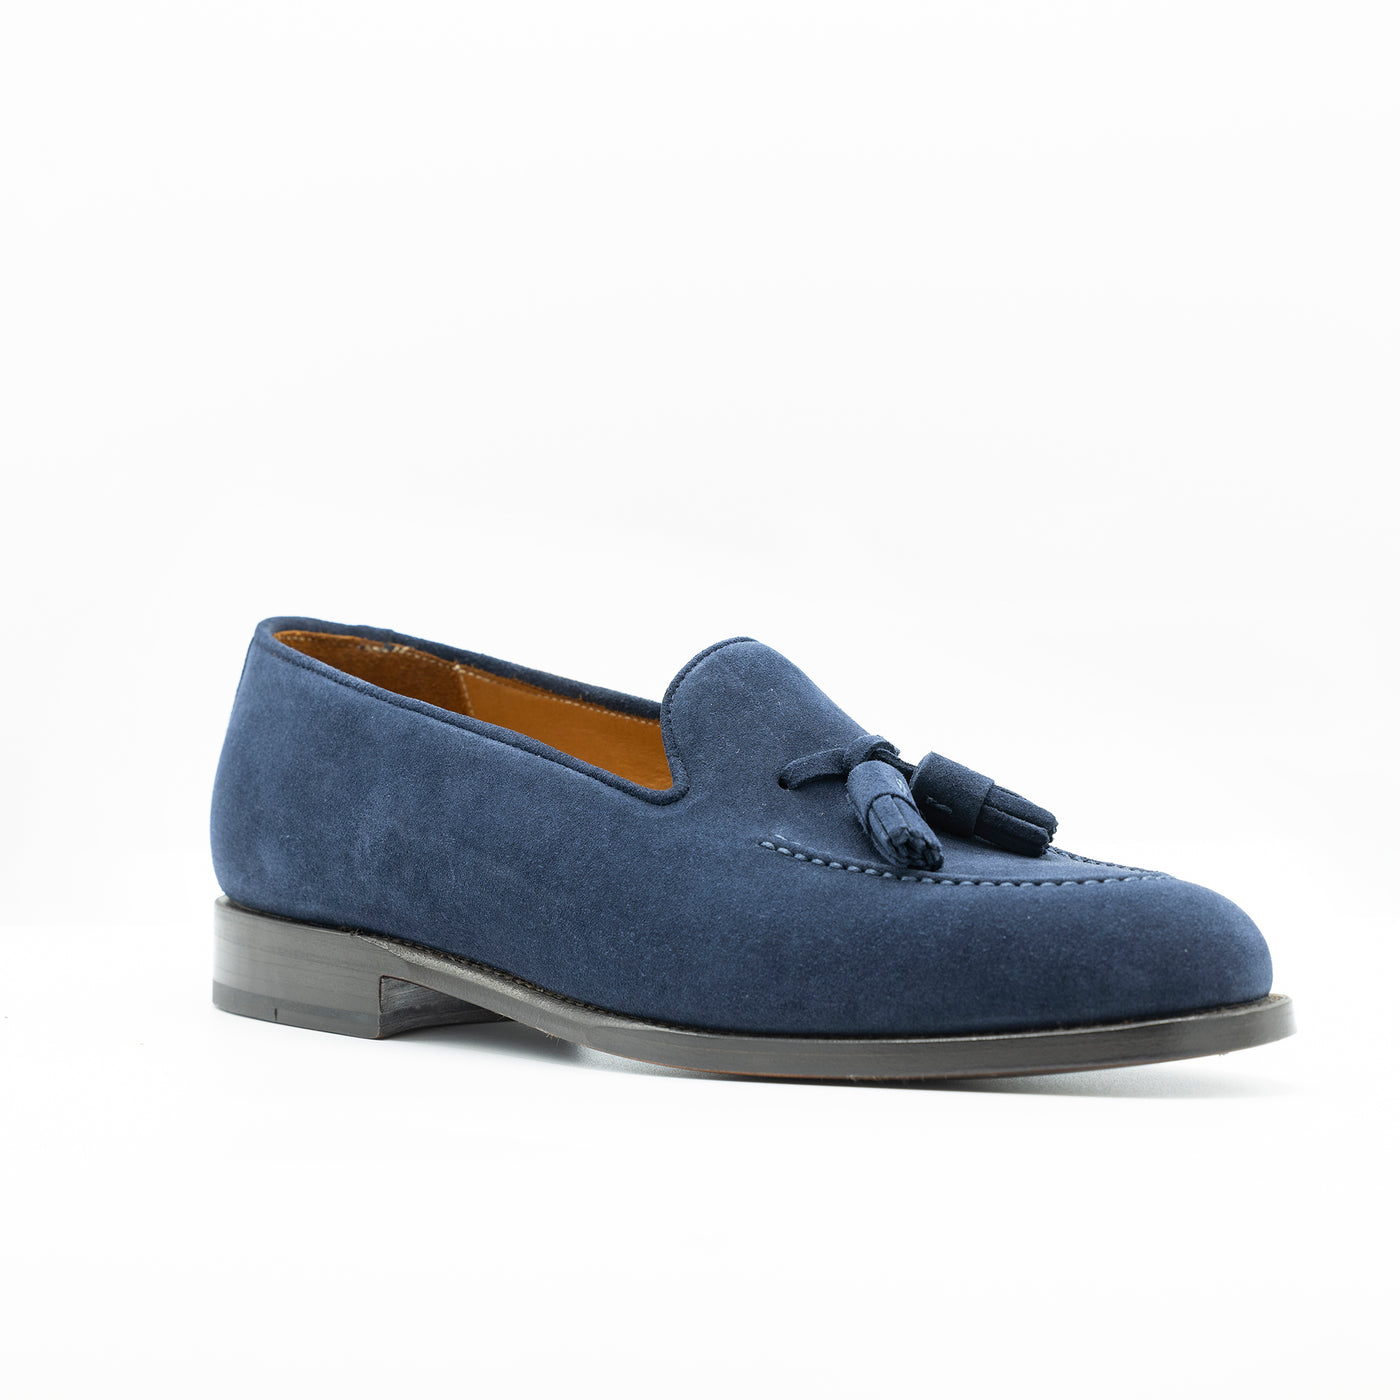 Men's blue suede tassel loafer on edgestitched leather soles.  